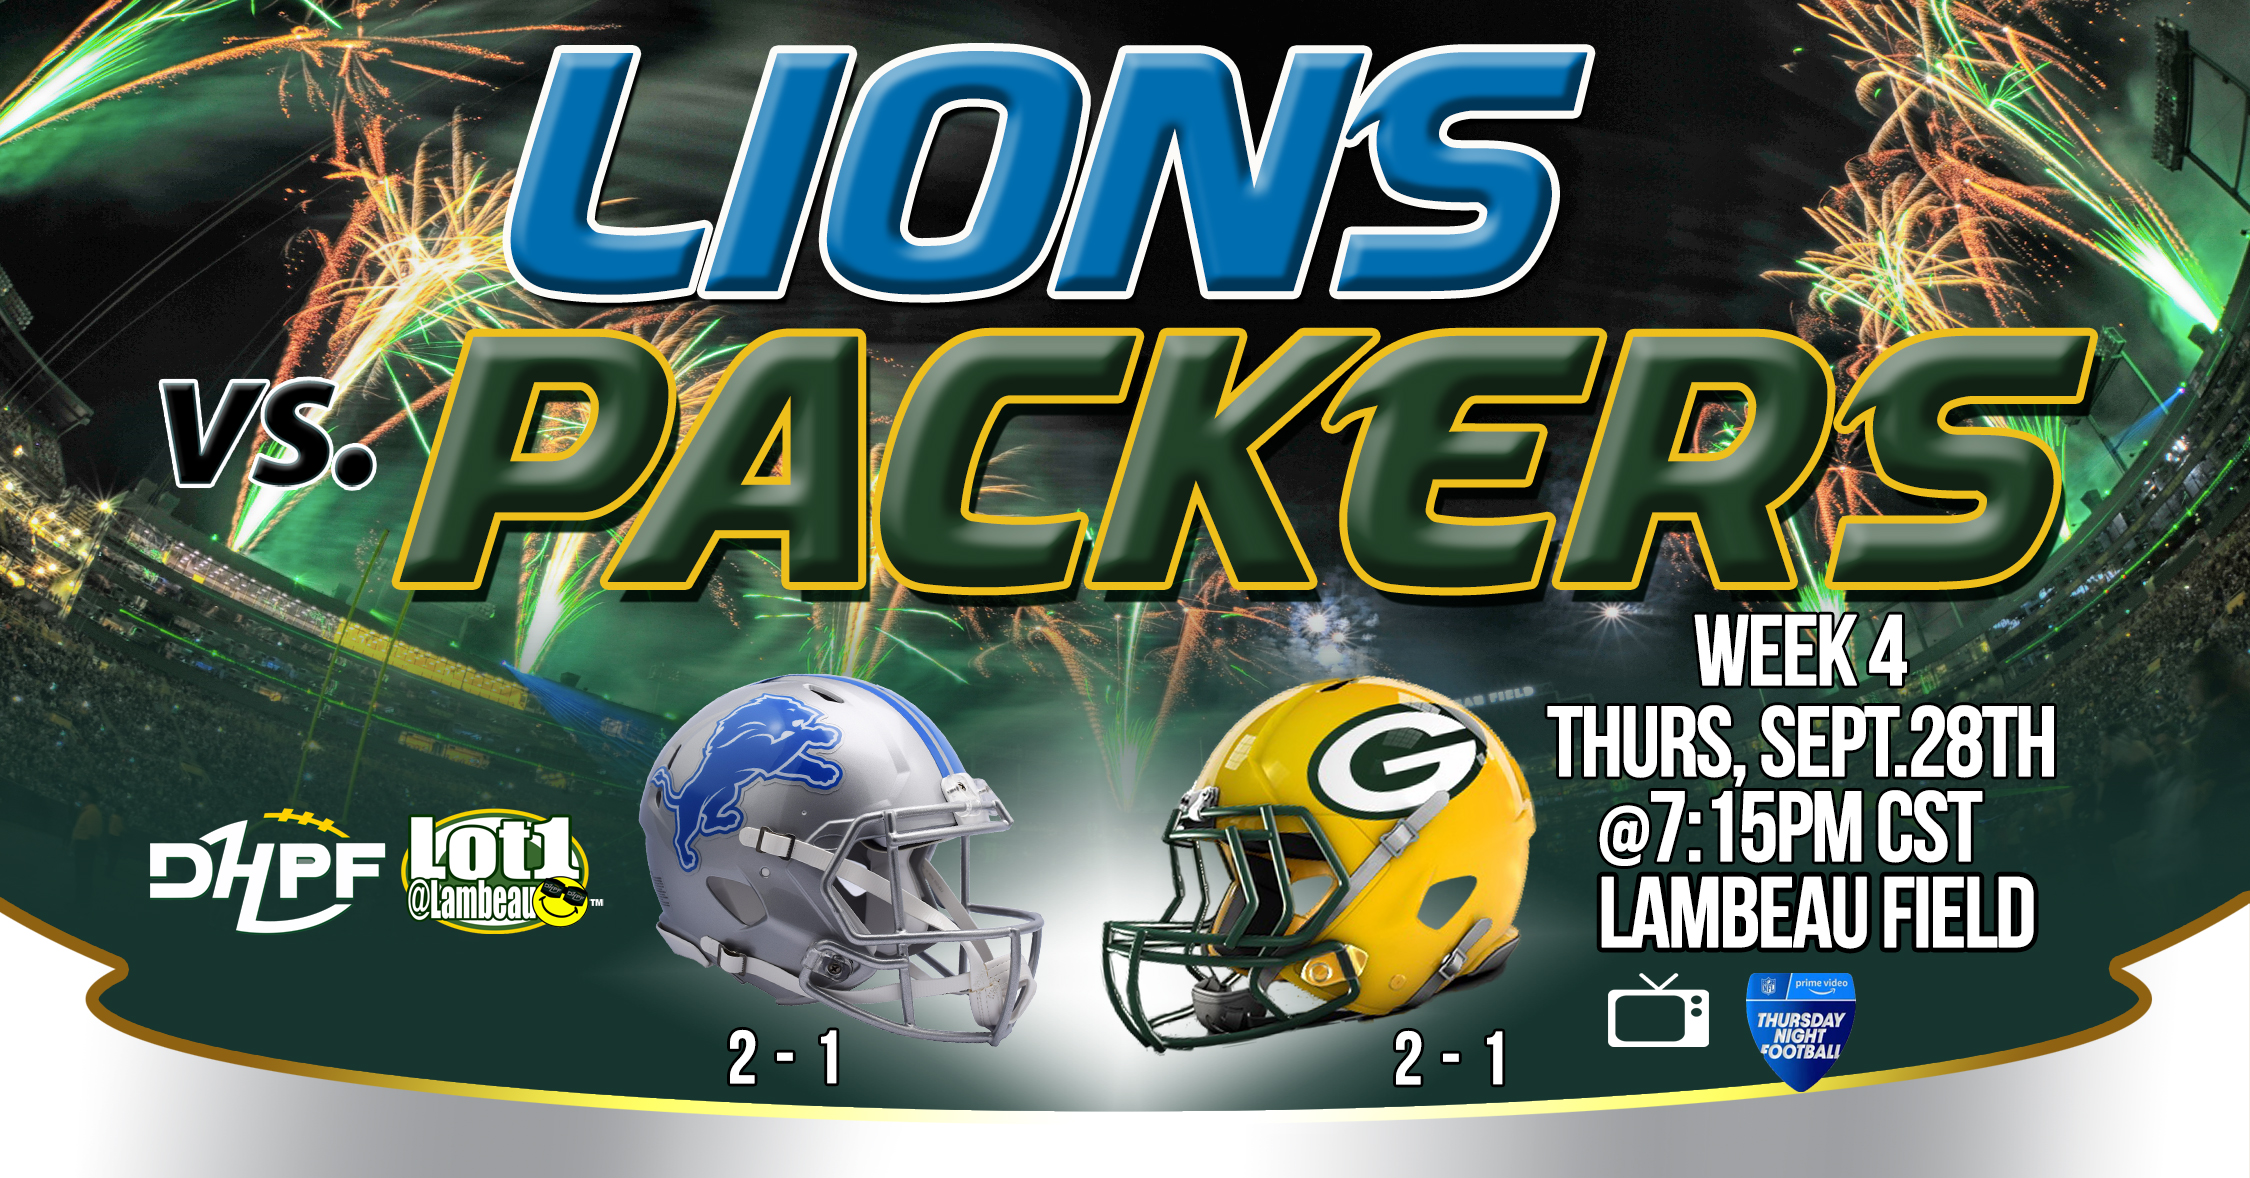 Packers-Lions game set for Sunday night at Lambeau Field